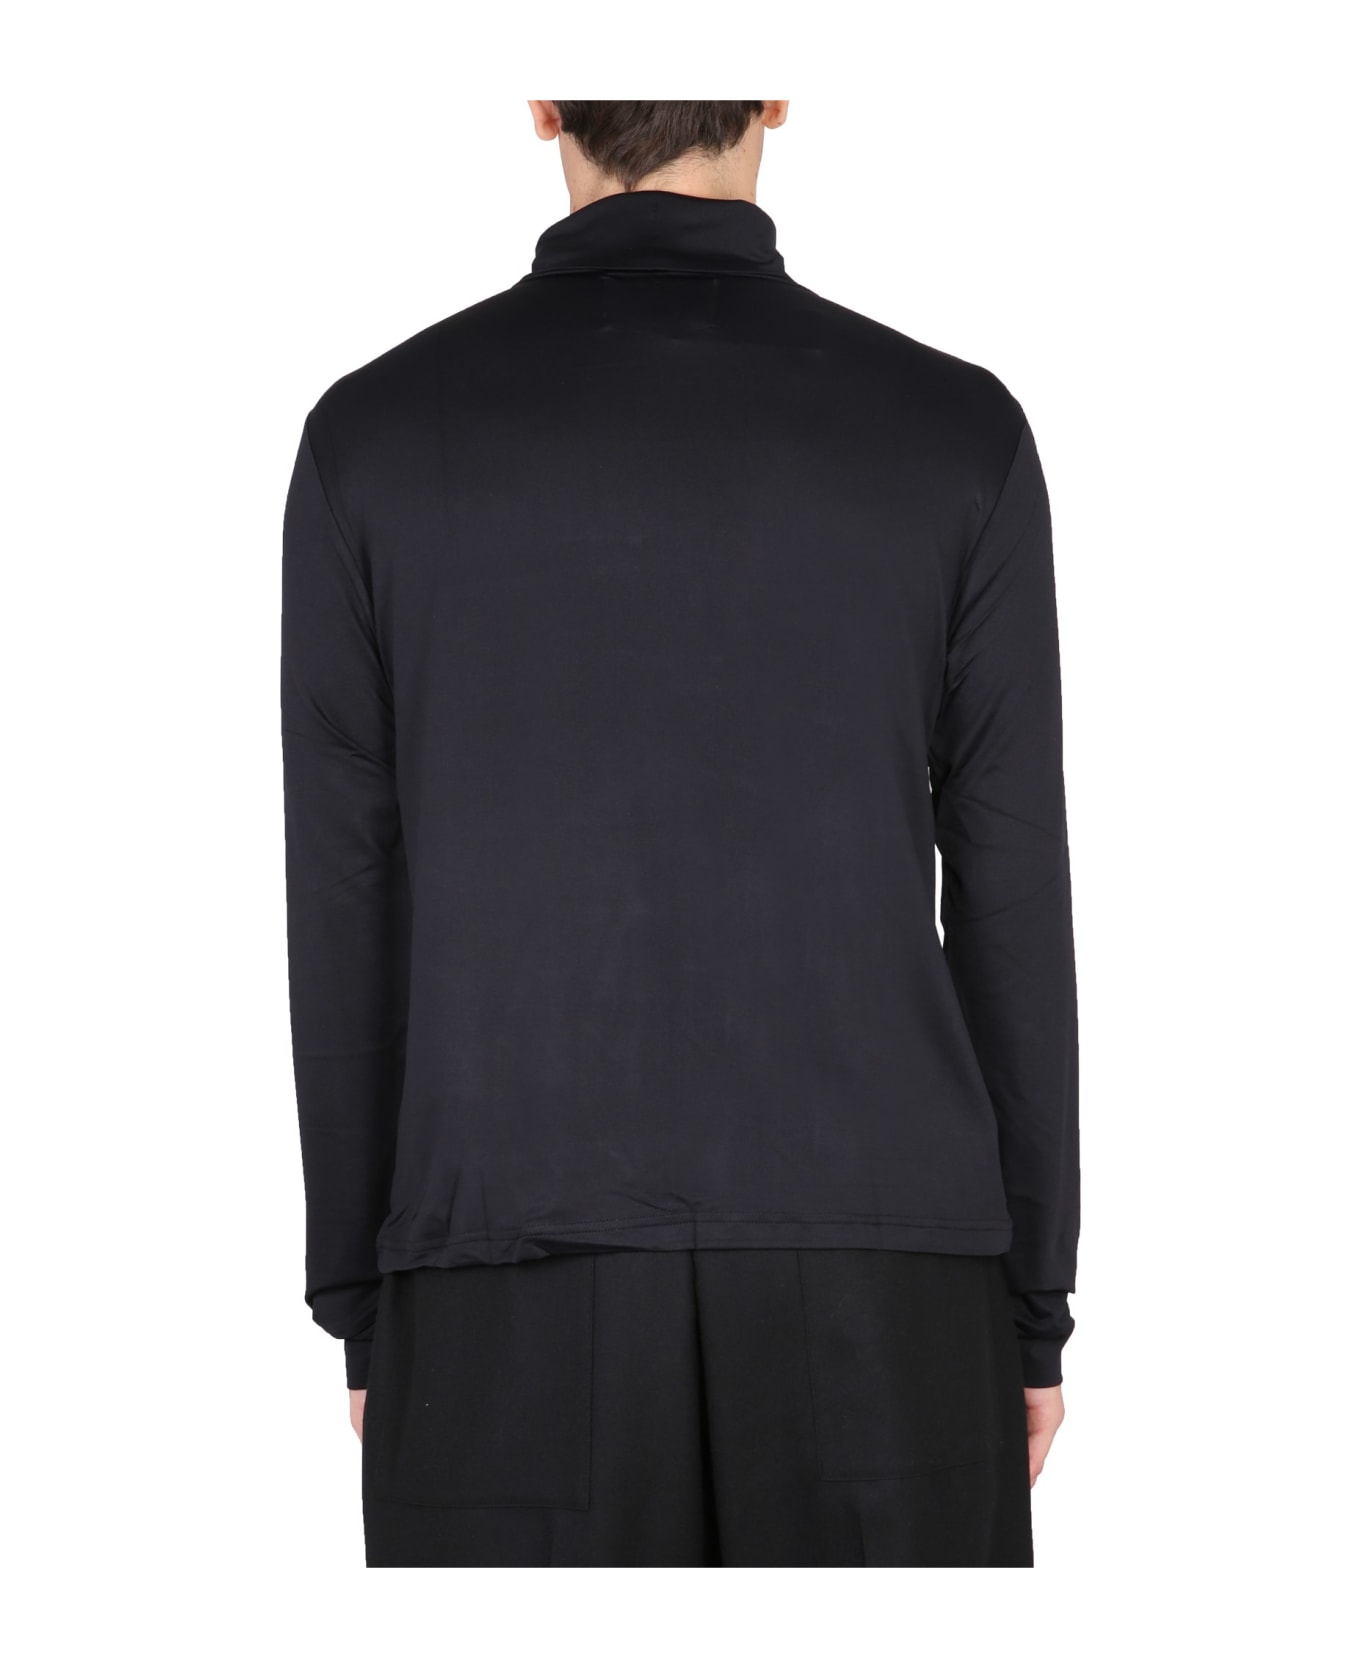 Fred Perry by Raf Simons Turtleneck T-shirt - NERO